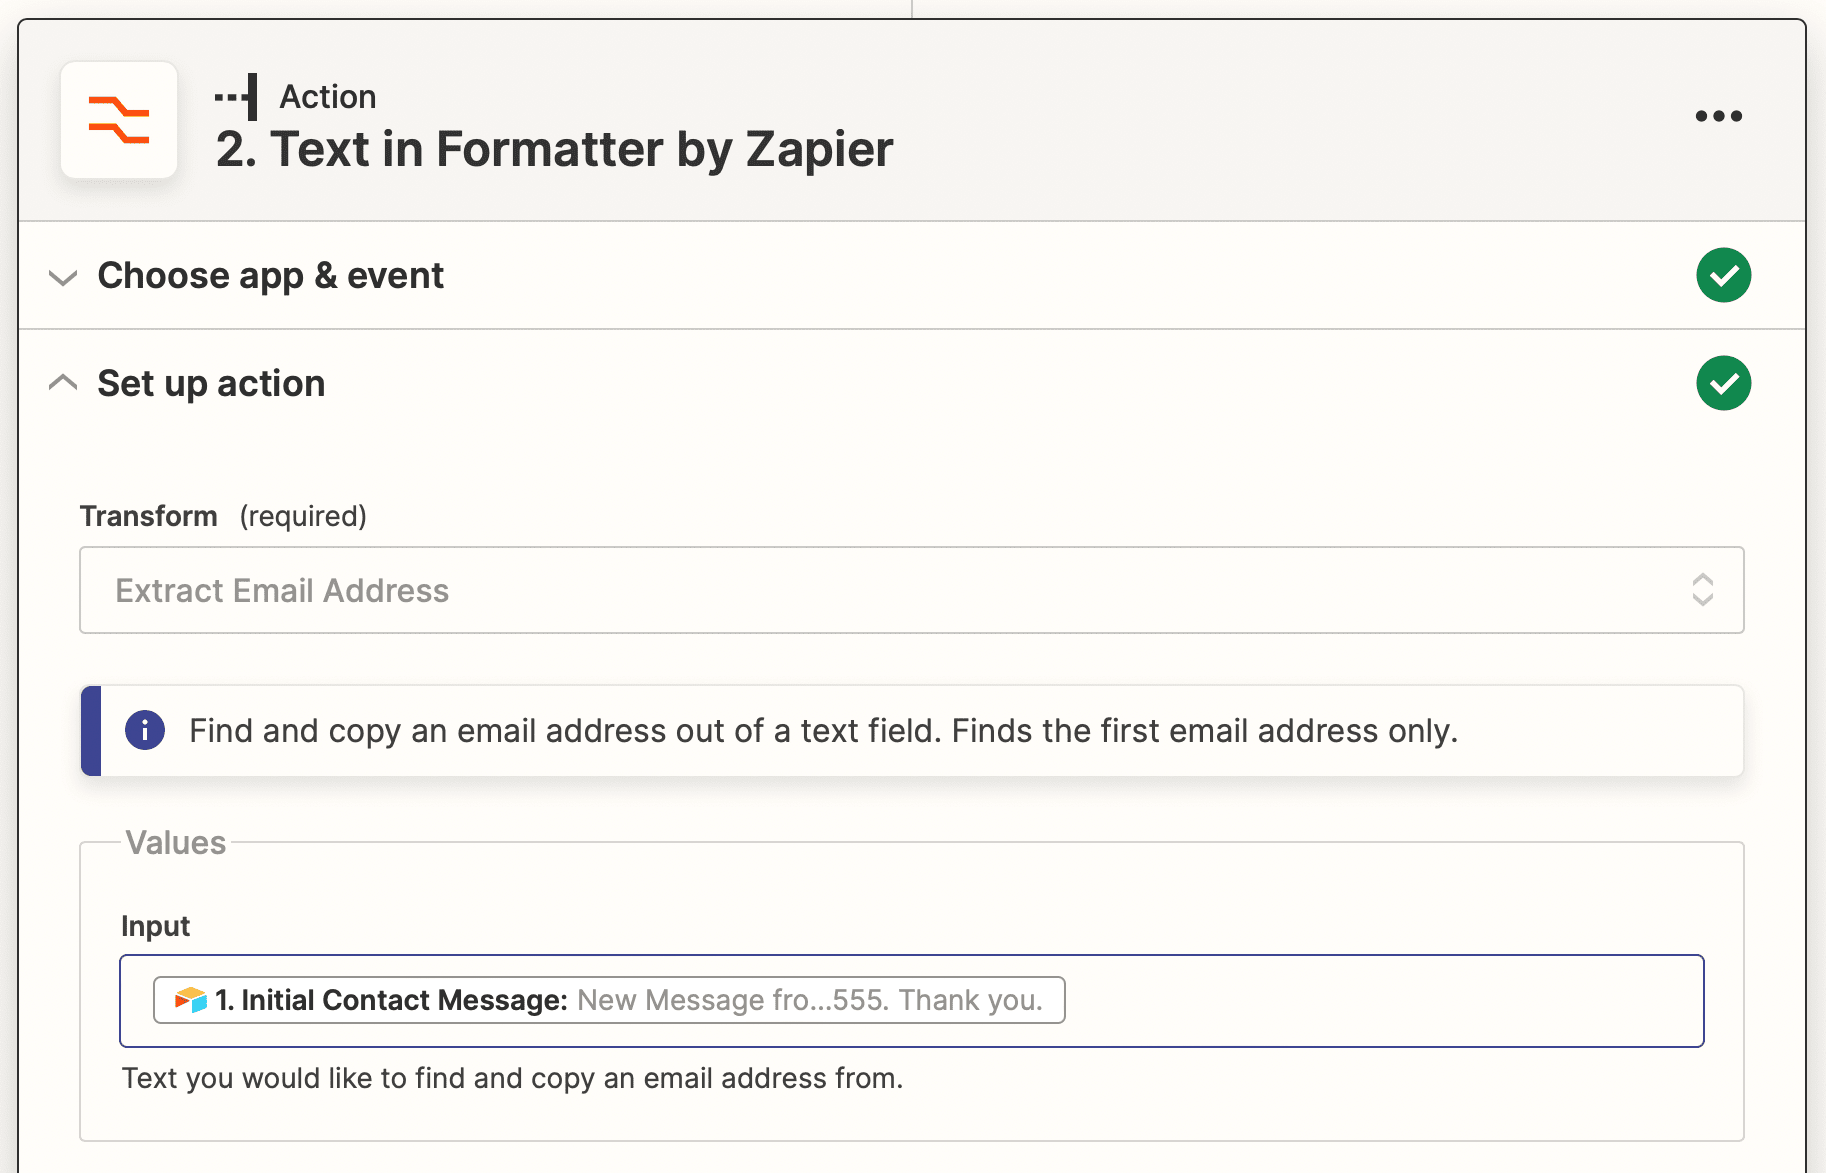 Screenshot of Zapier text in formatter action with extract email address transform